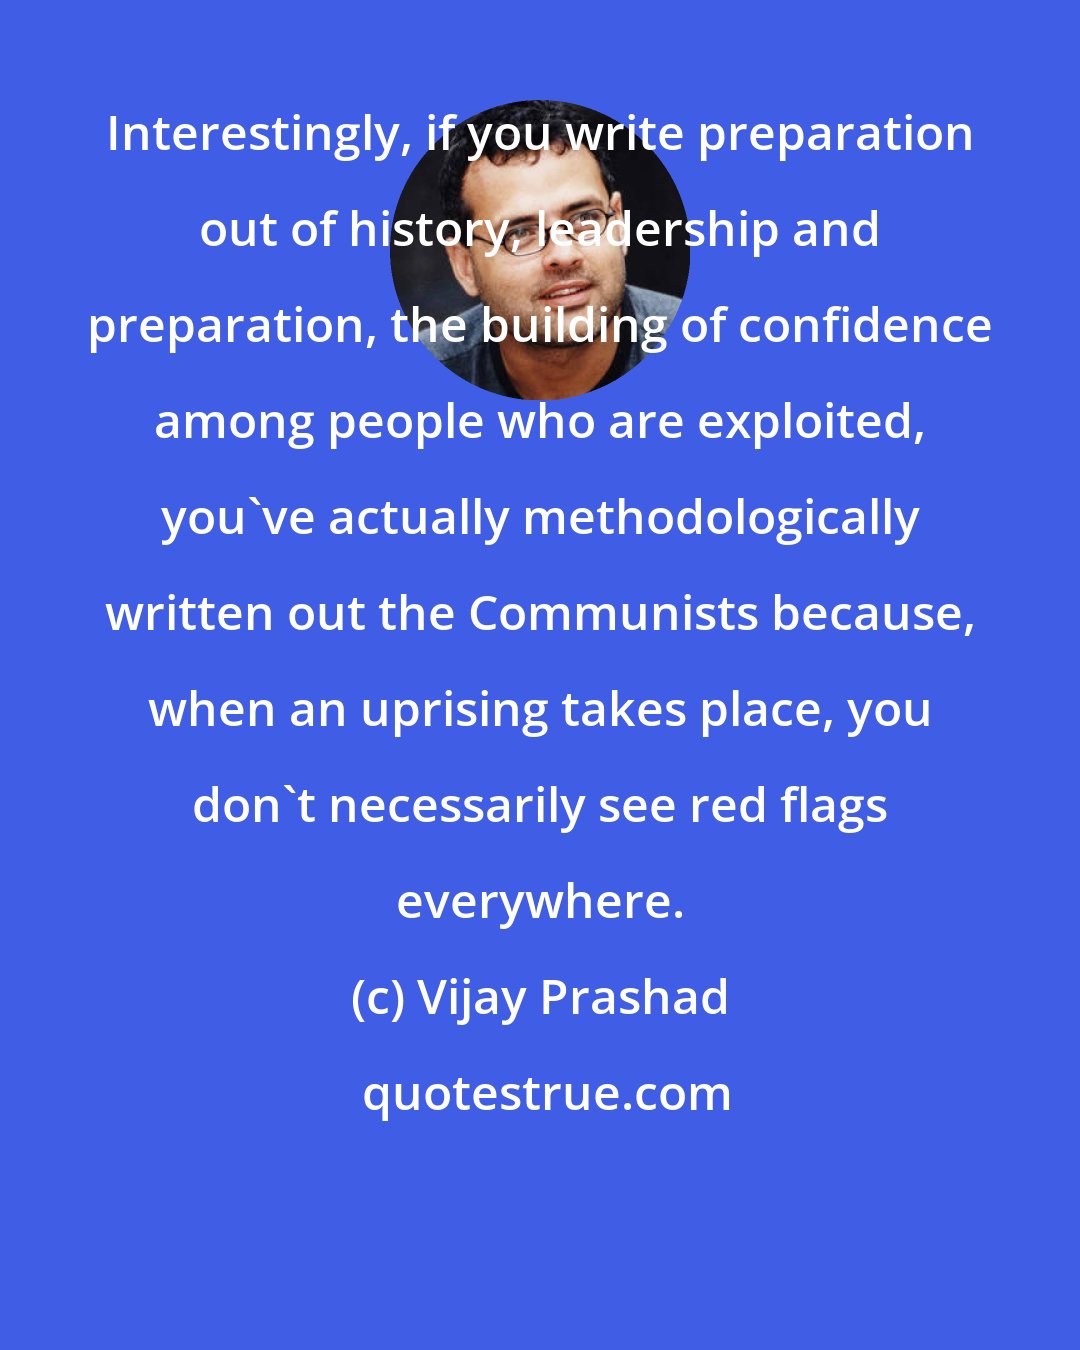 Vijay Prashad: Interestingly, if you write preparation out of history, leadership and preparation, the building of confidence among people who are exploited, you've actually methodologically written out the Communists because, when an uprising takes place, you don't necessarily see red flags everywhere.